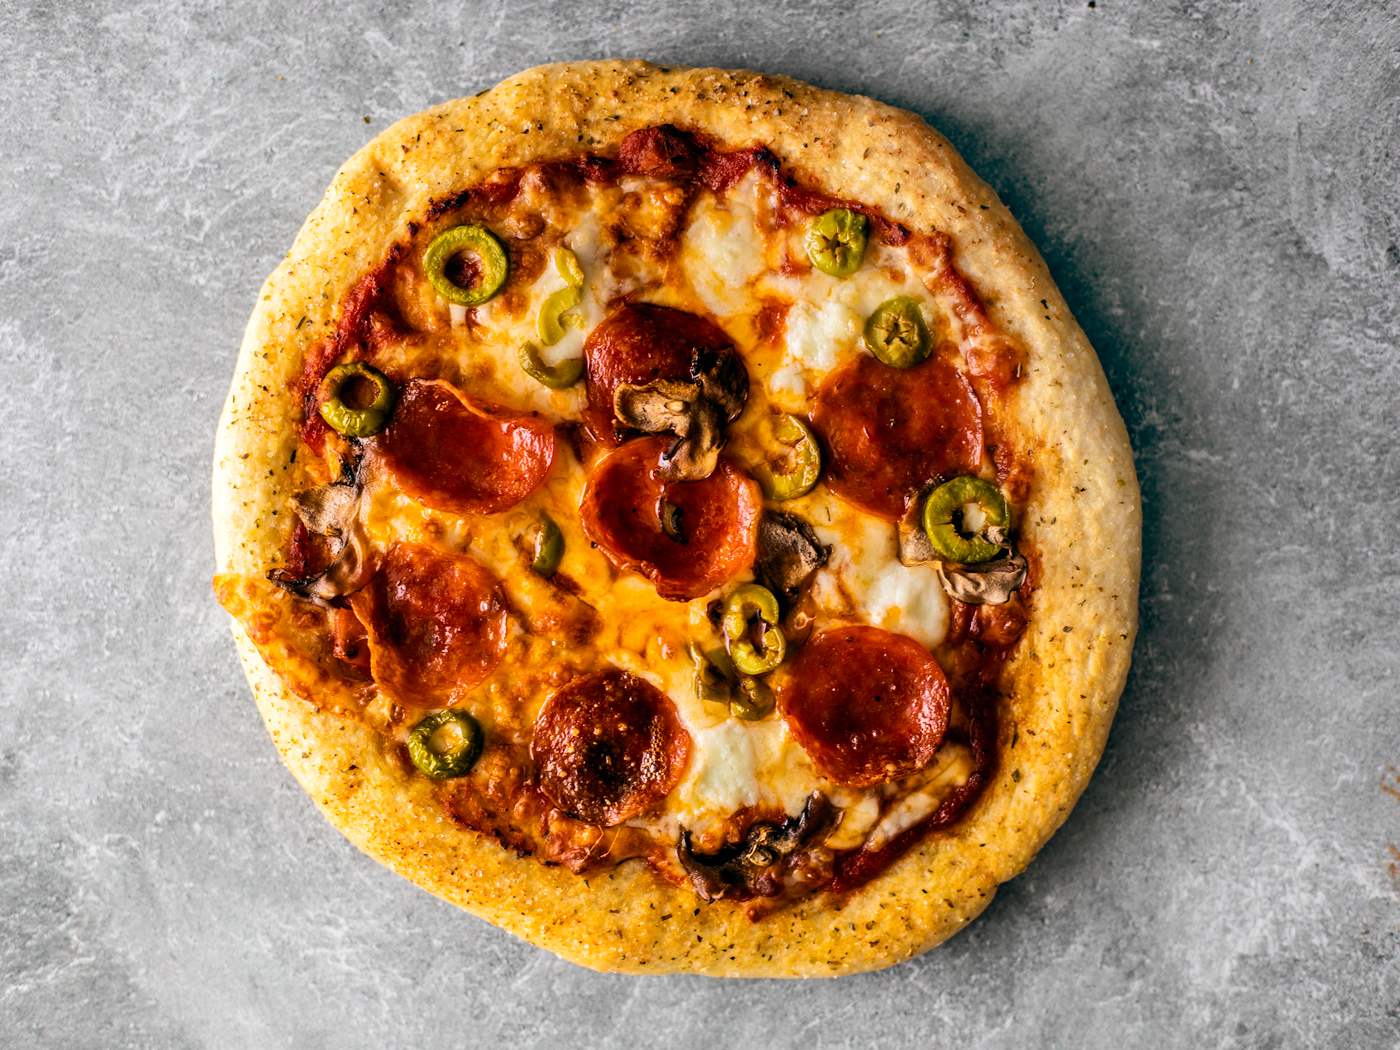 Golden crisp pizza with cheese, pepperoni, olives, and mushrooms.